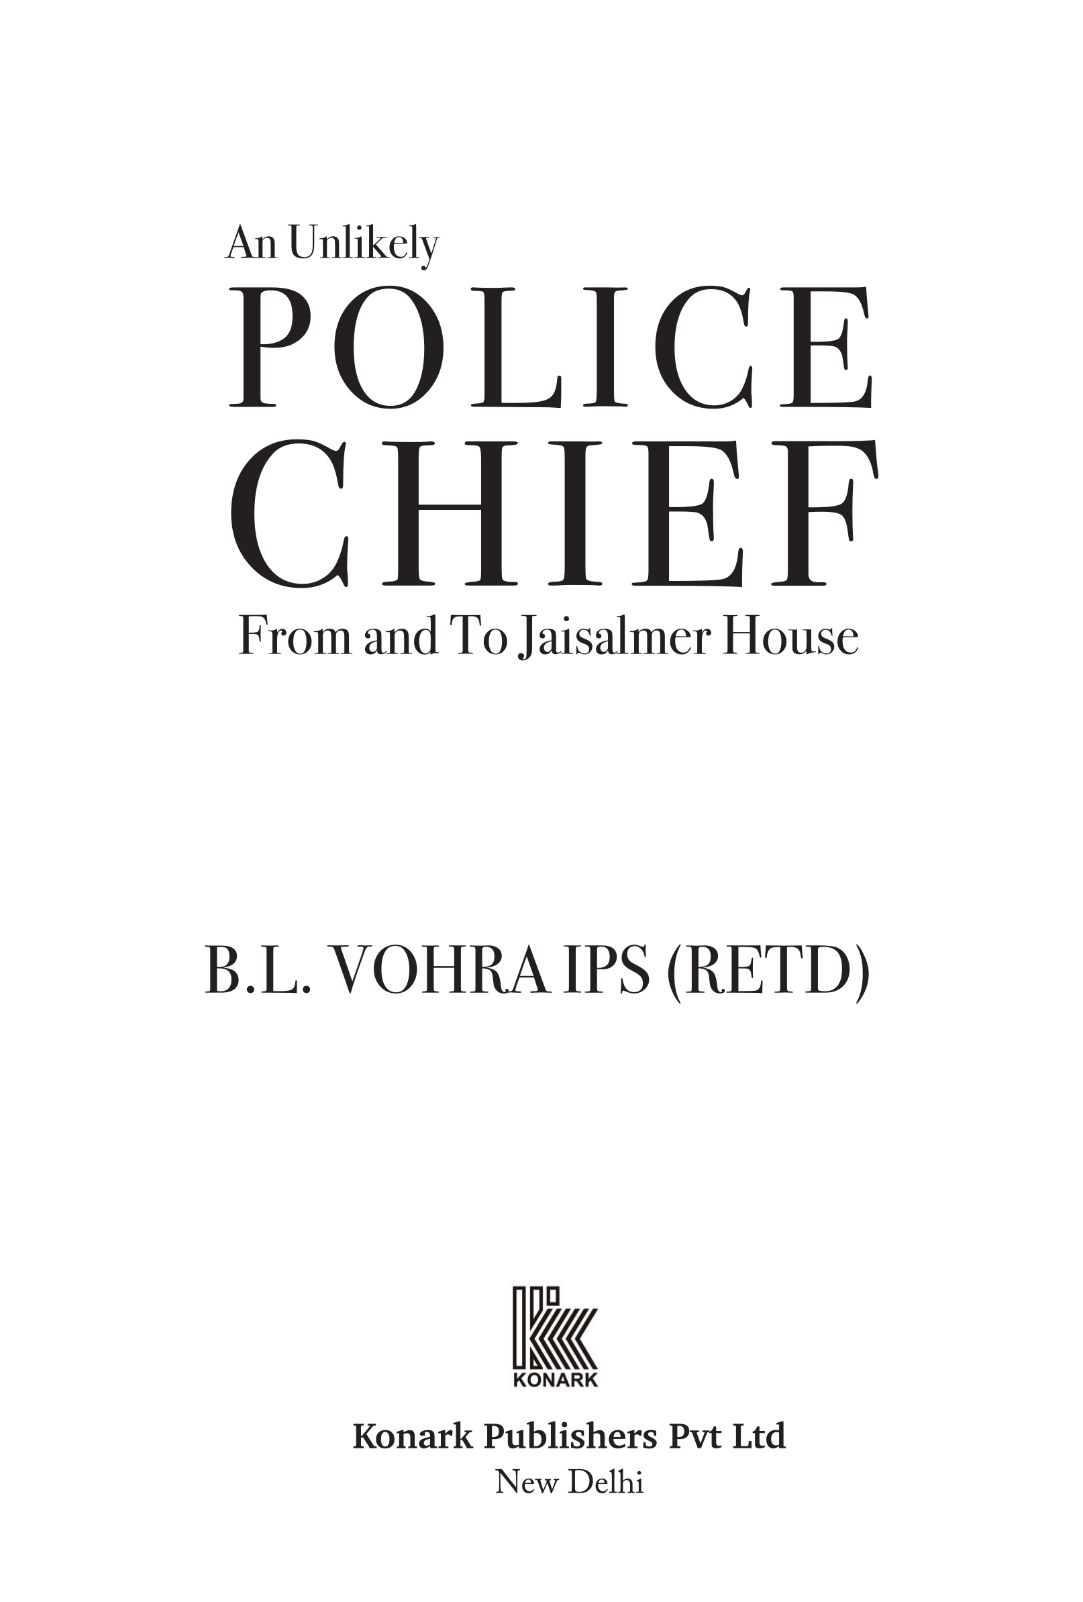 An Unlikely Police Chief From and To Jaisalmer House - image 1